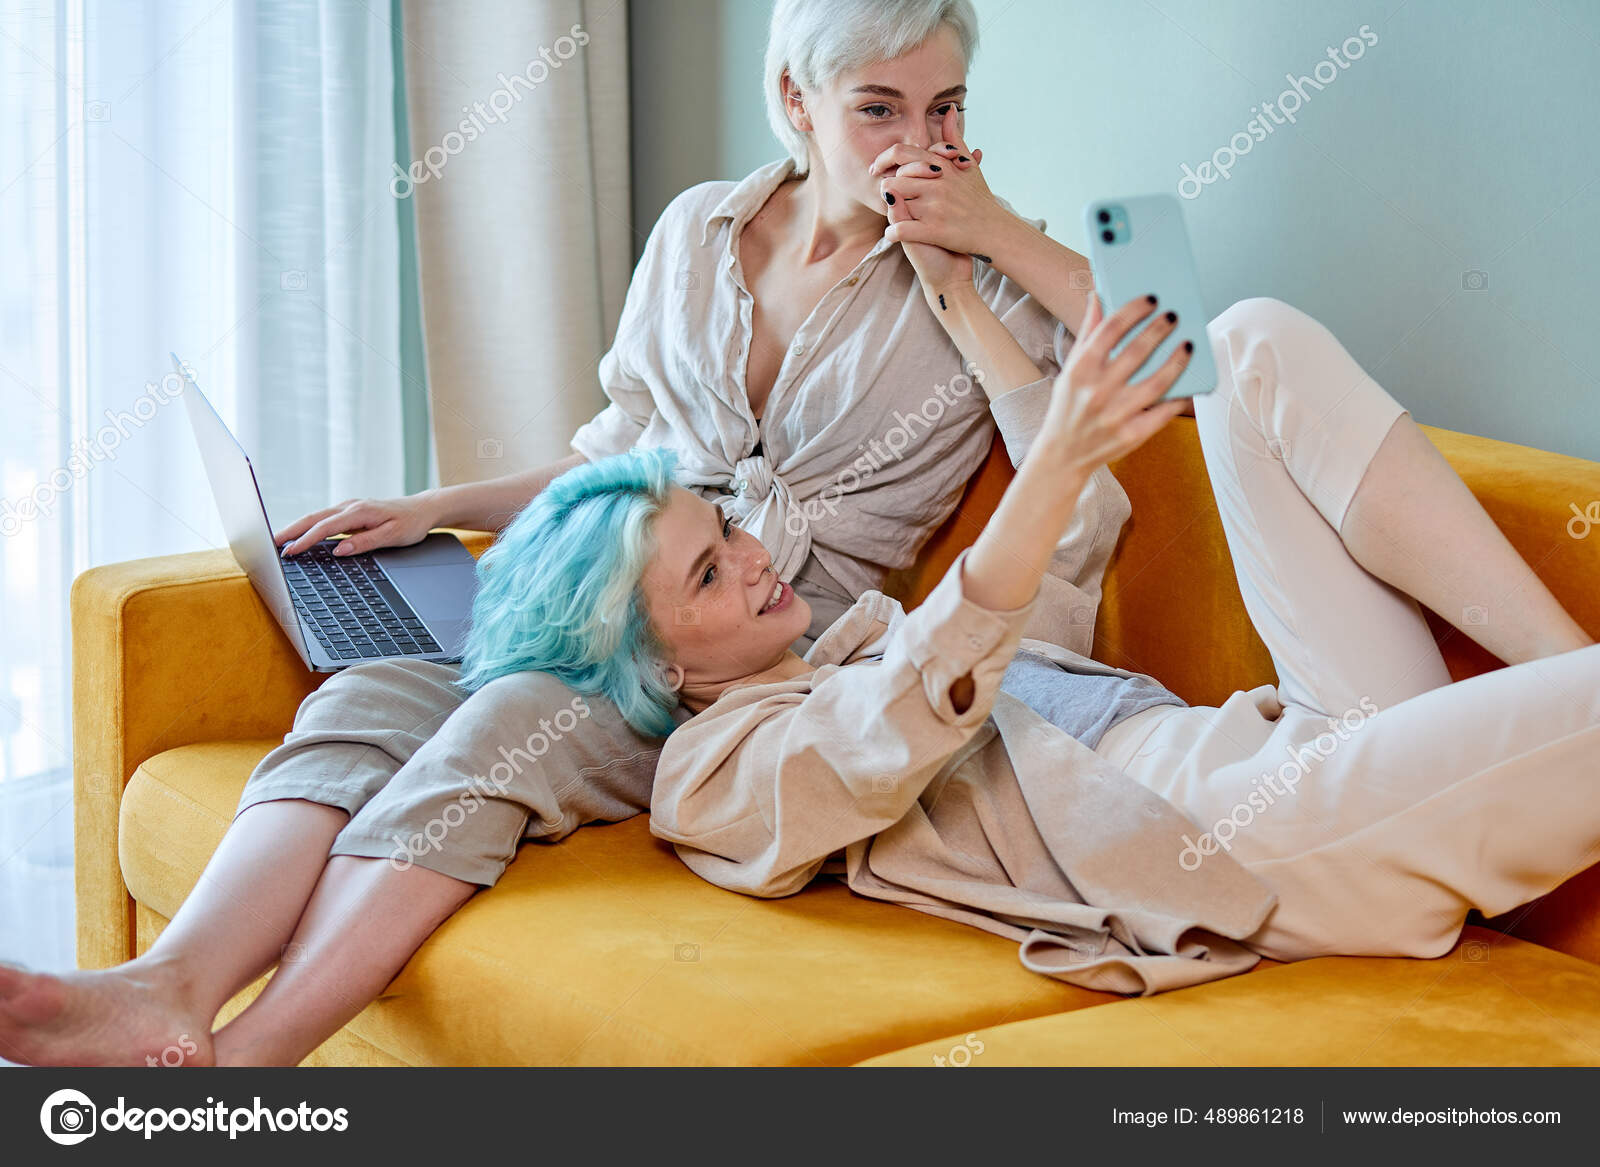 Lgbt Lesbian Couple Best Girlfriends Having Rest At Home On Sofa Take Photo On Smartphone Stock